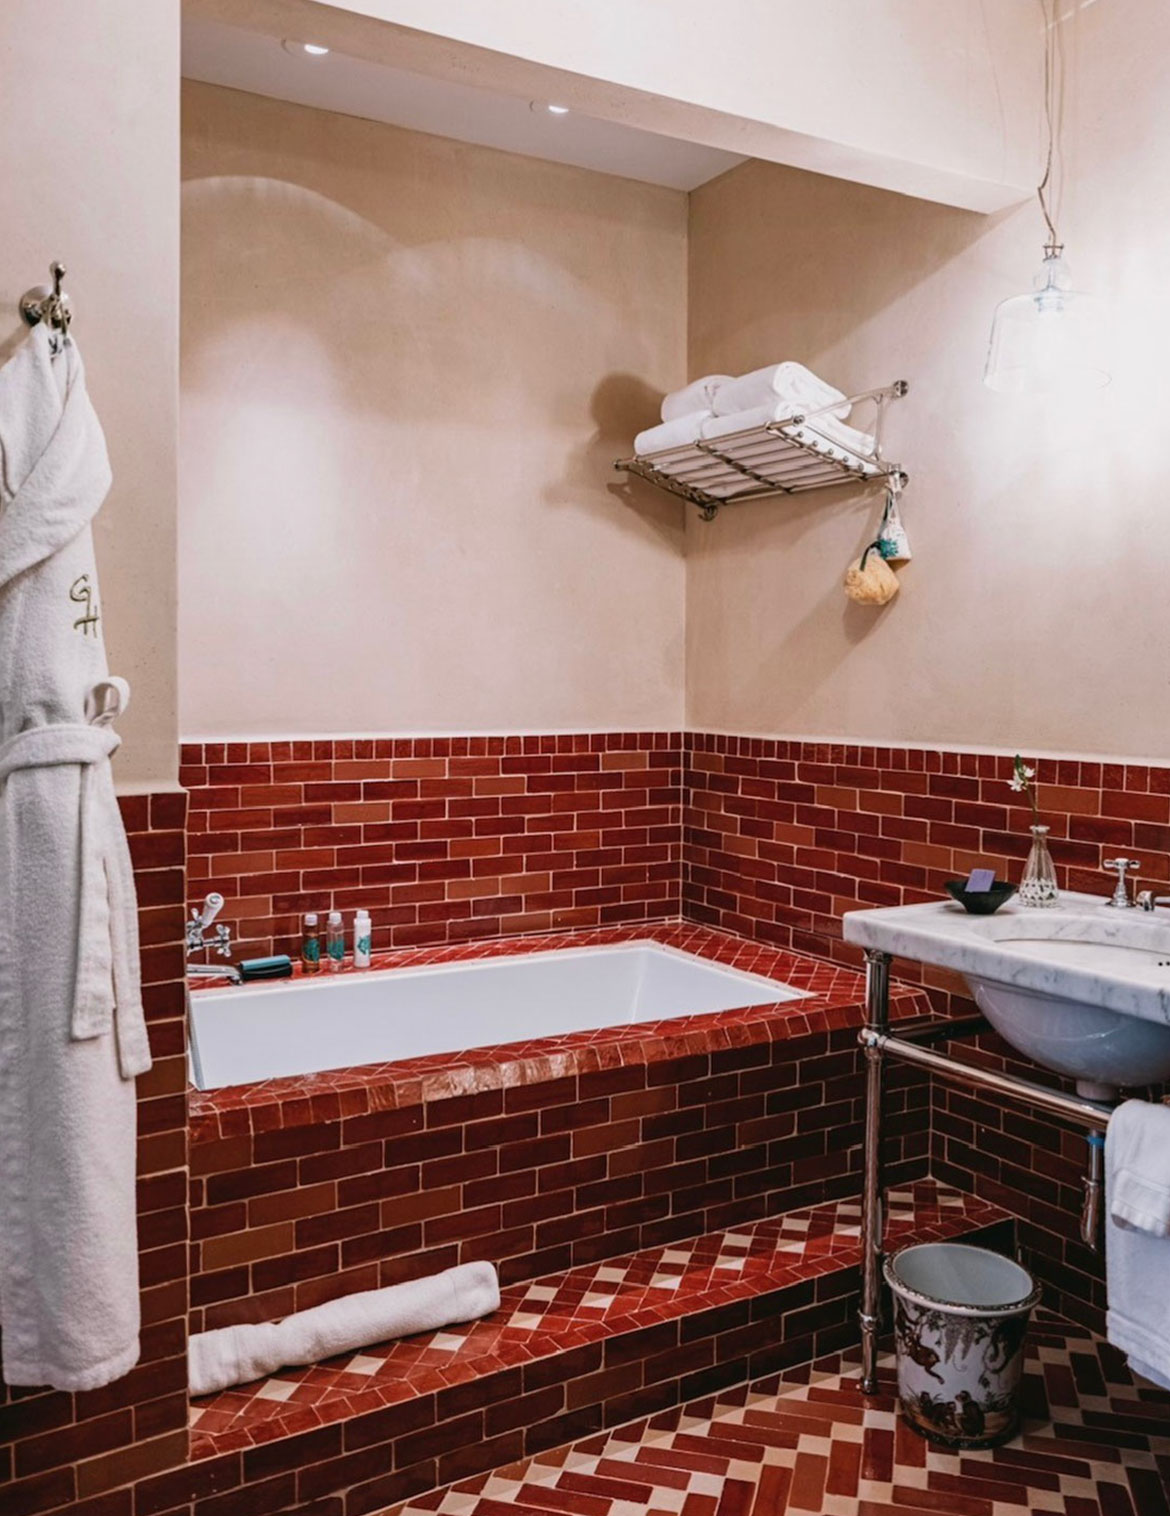 The generously sized bathroom features Moroccan tile, with an extra deep soaking tub alcove, separate walk-in rain shower and double basin sink vanity.